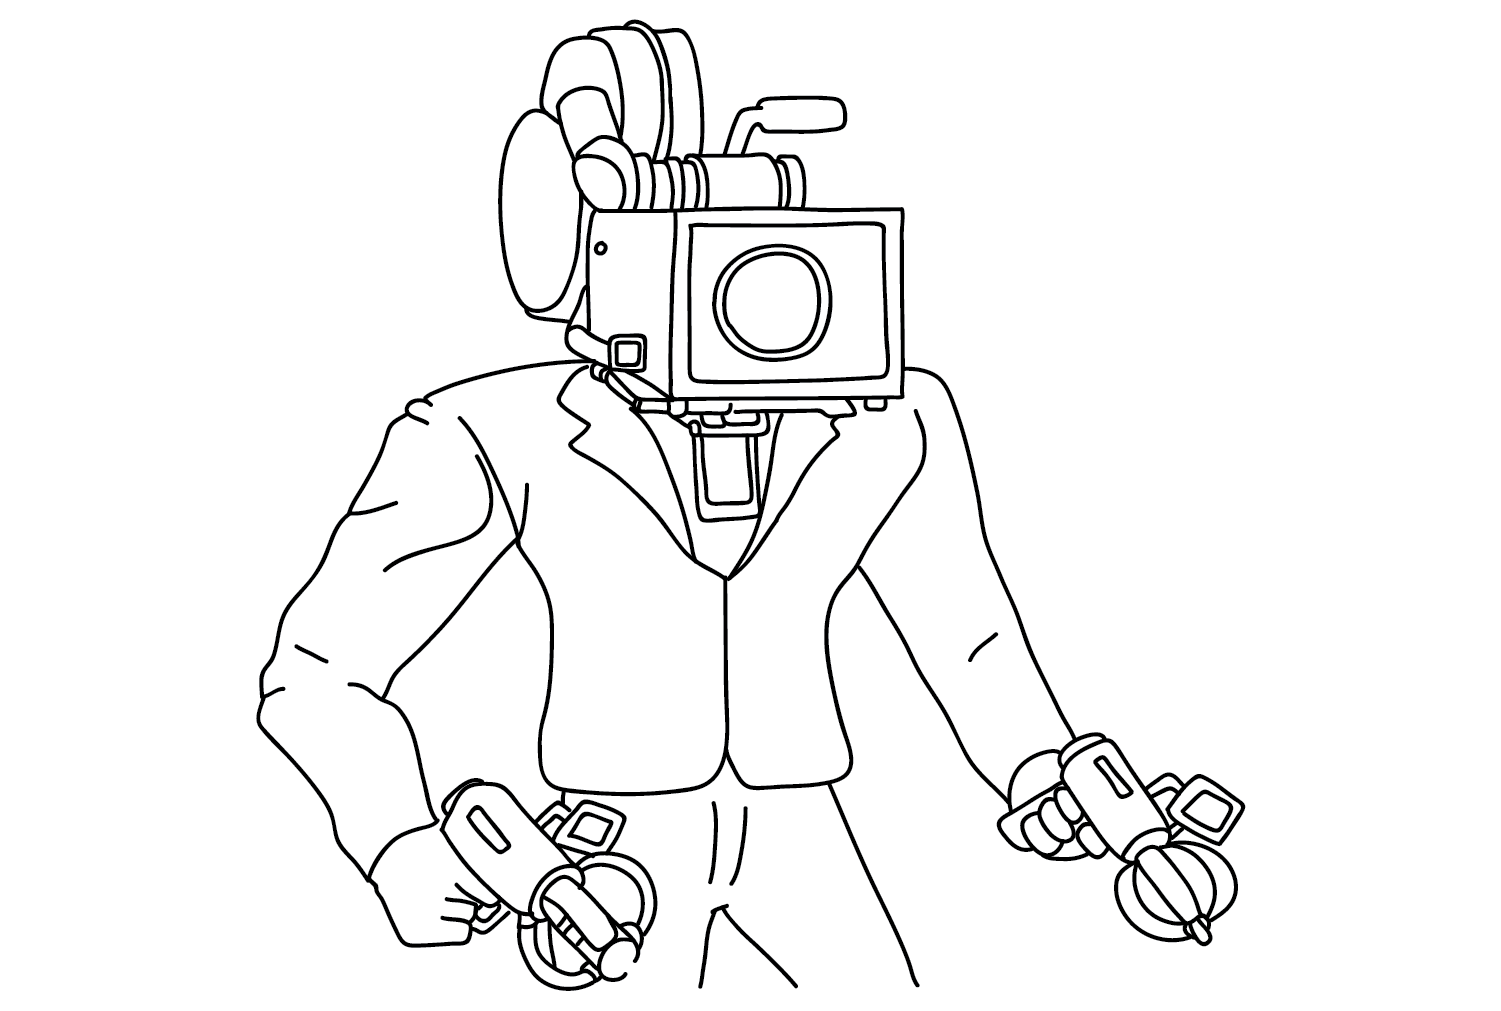 Cameraman Picture to Color from Cameraman